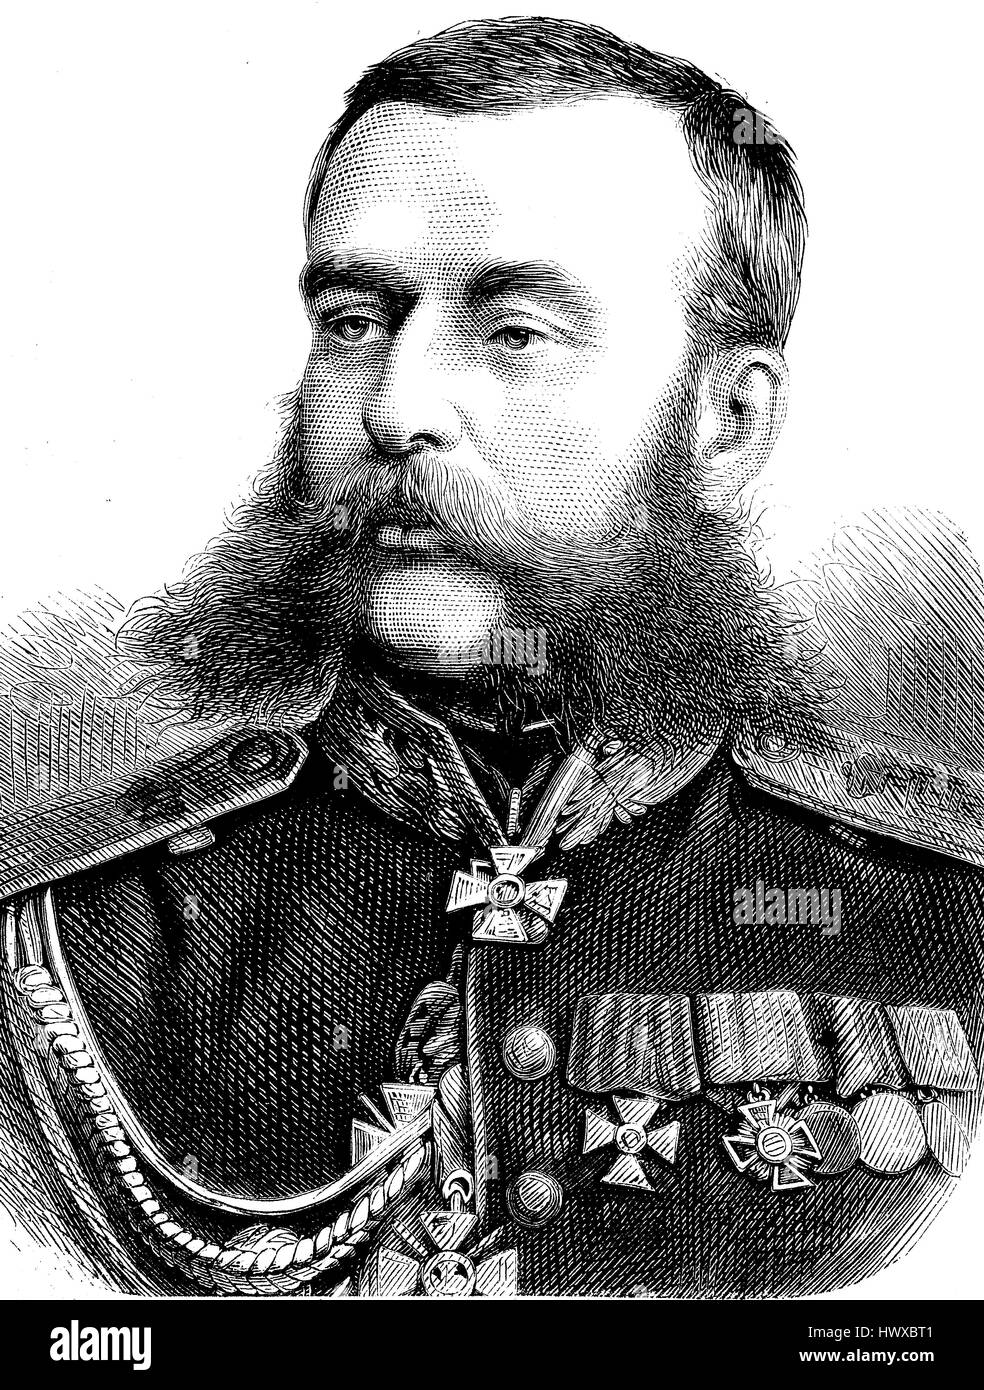 Michael Dimitrijewitsch Skobelev also Michail Dmitrievic Skobelev, 29. September 1843 in Sankt Petersburg - 7. Juli 1882 in Moskau, he was a General of the Imperial Russian army, reproduction of an image, woodcut from the year 1881, digital improved Stock Photo